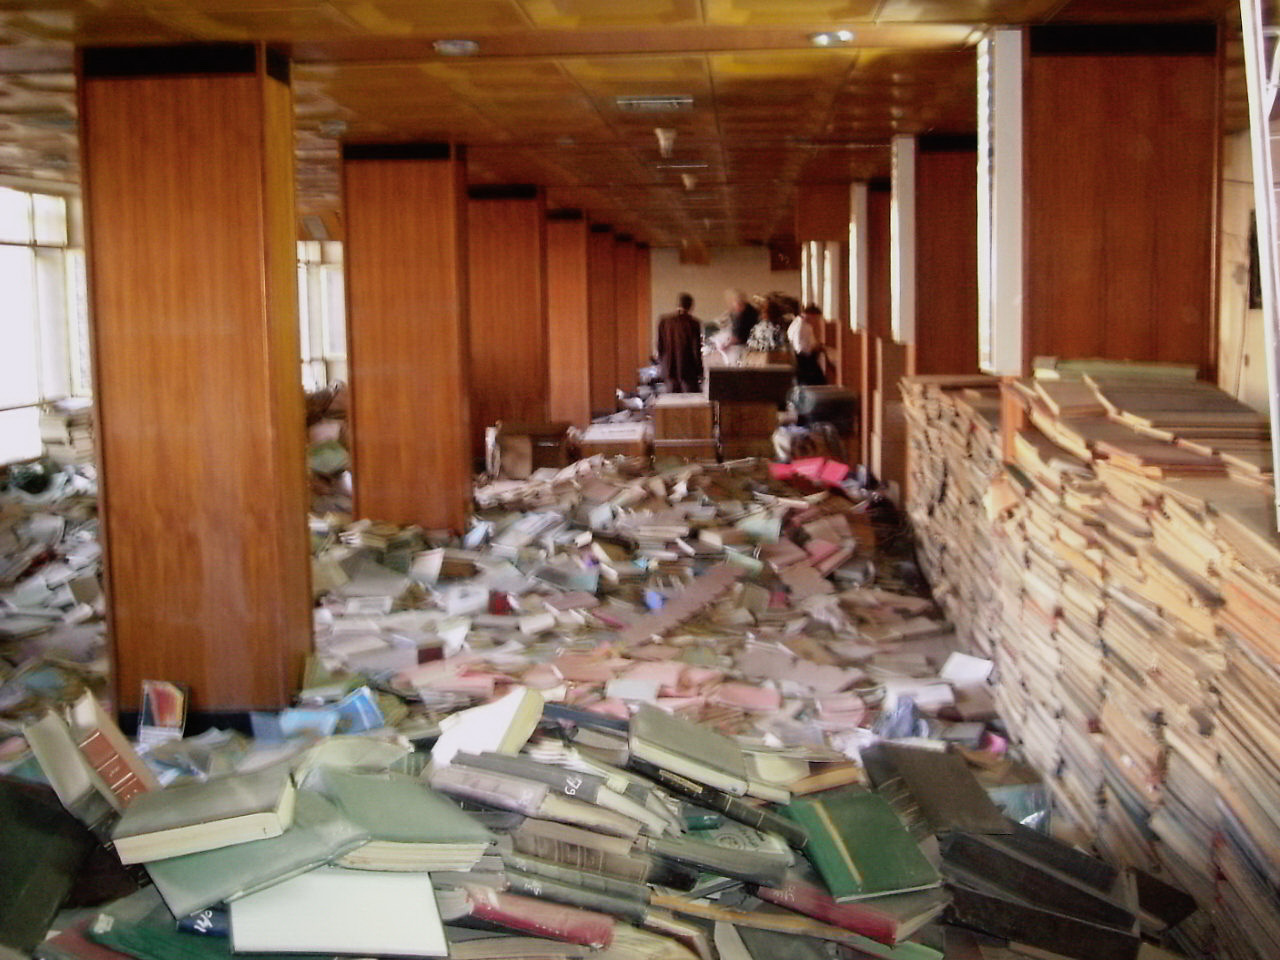 Officer's library in disarray 